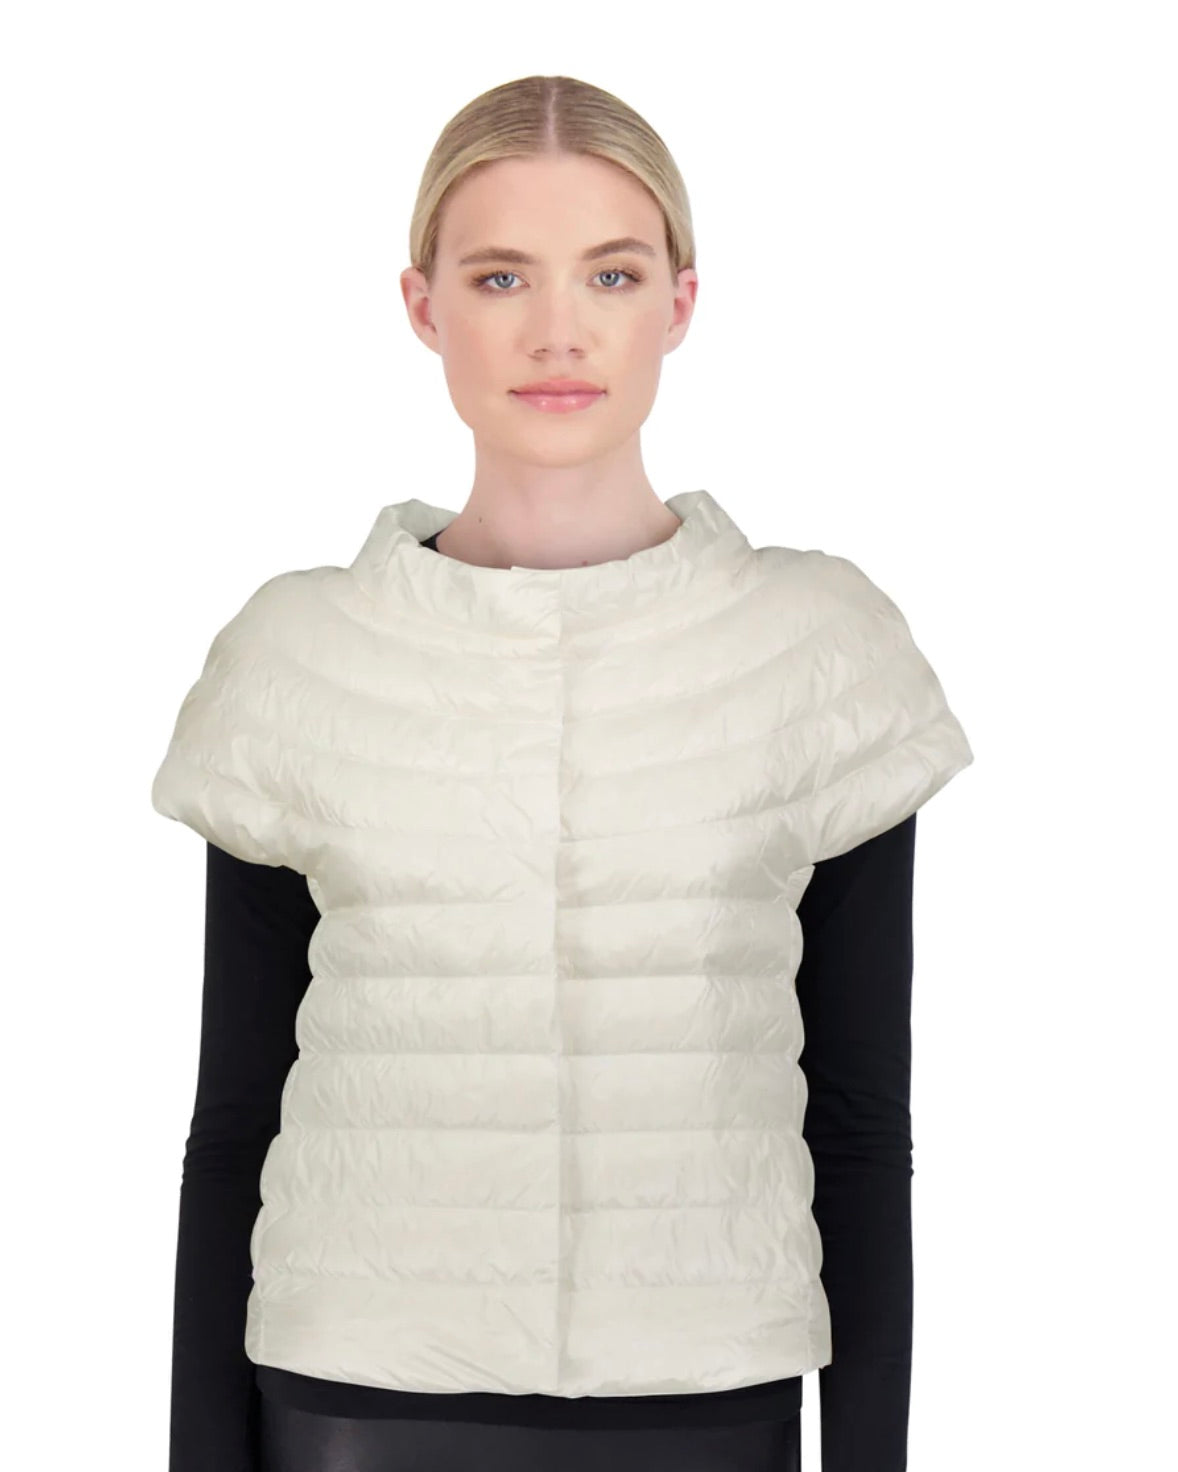 Model wearing Cotes of London St Barts Down Vest ivory color on a white background